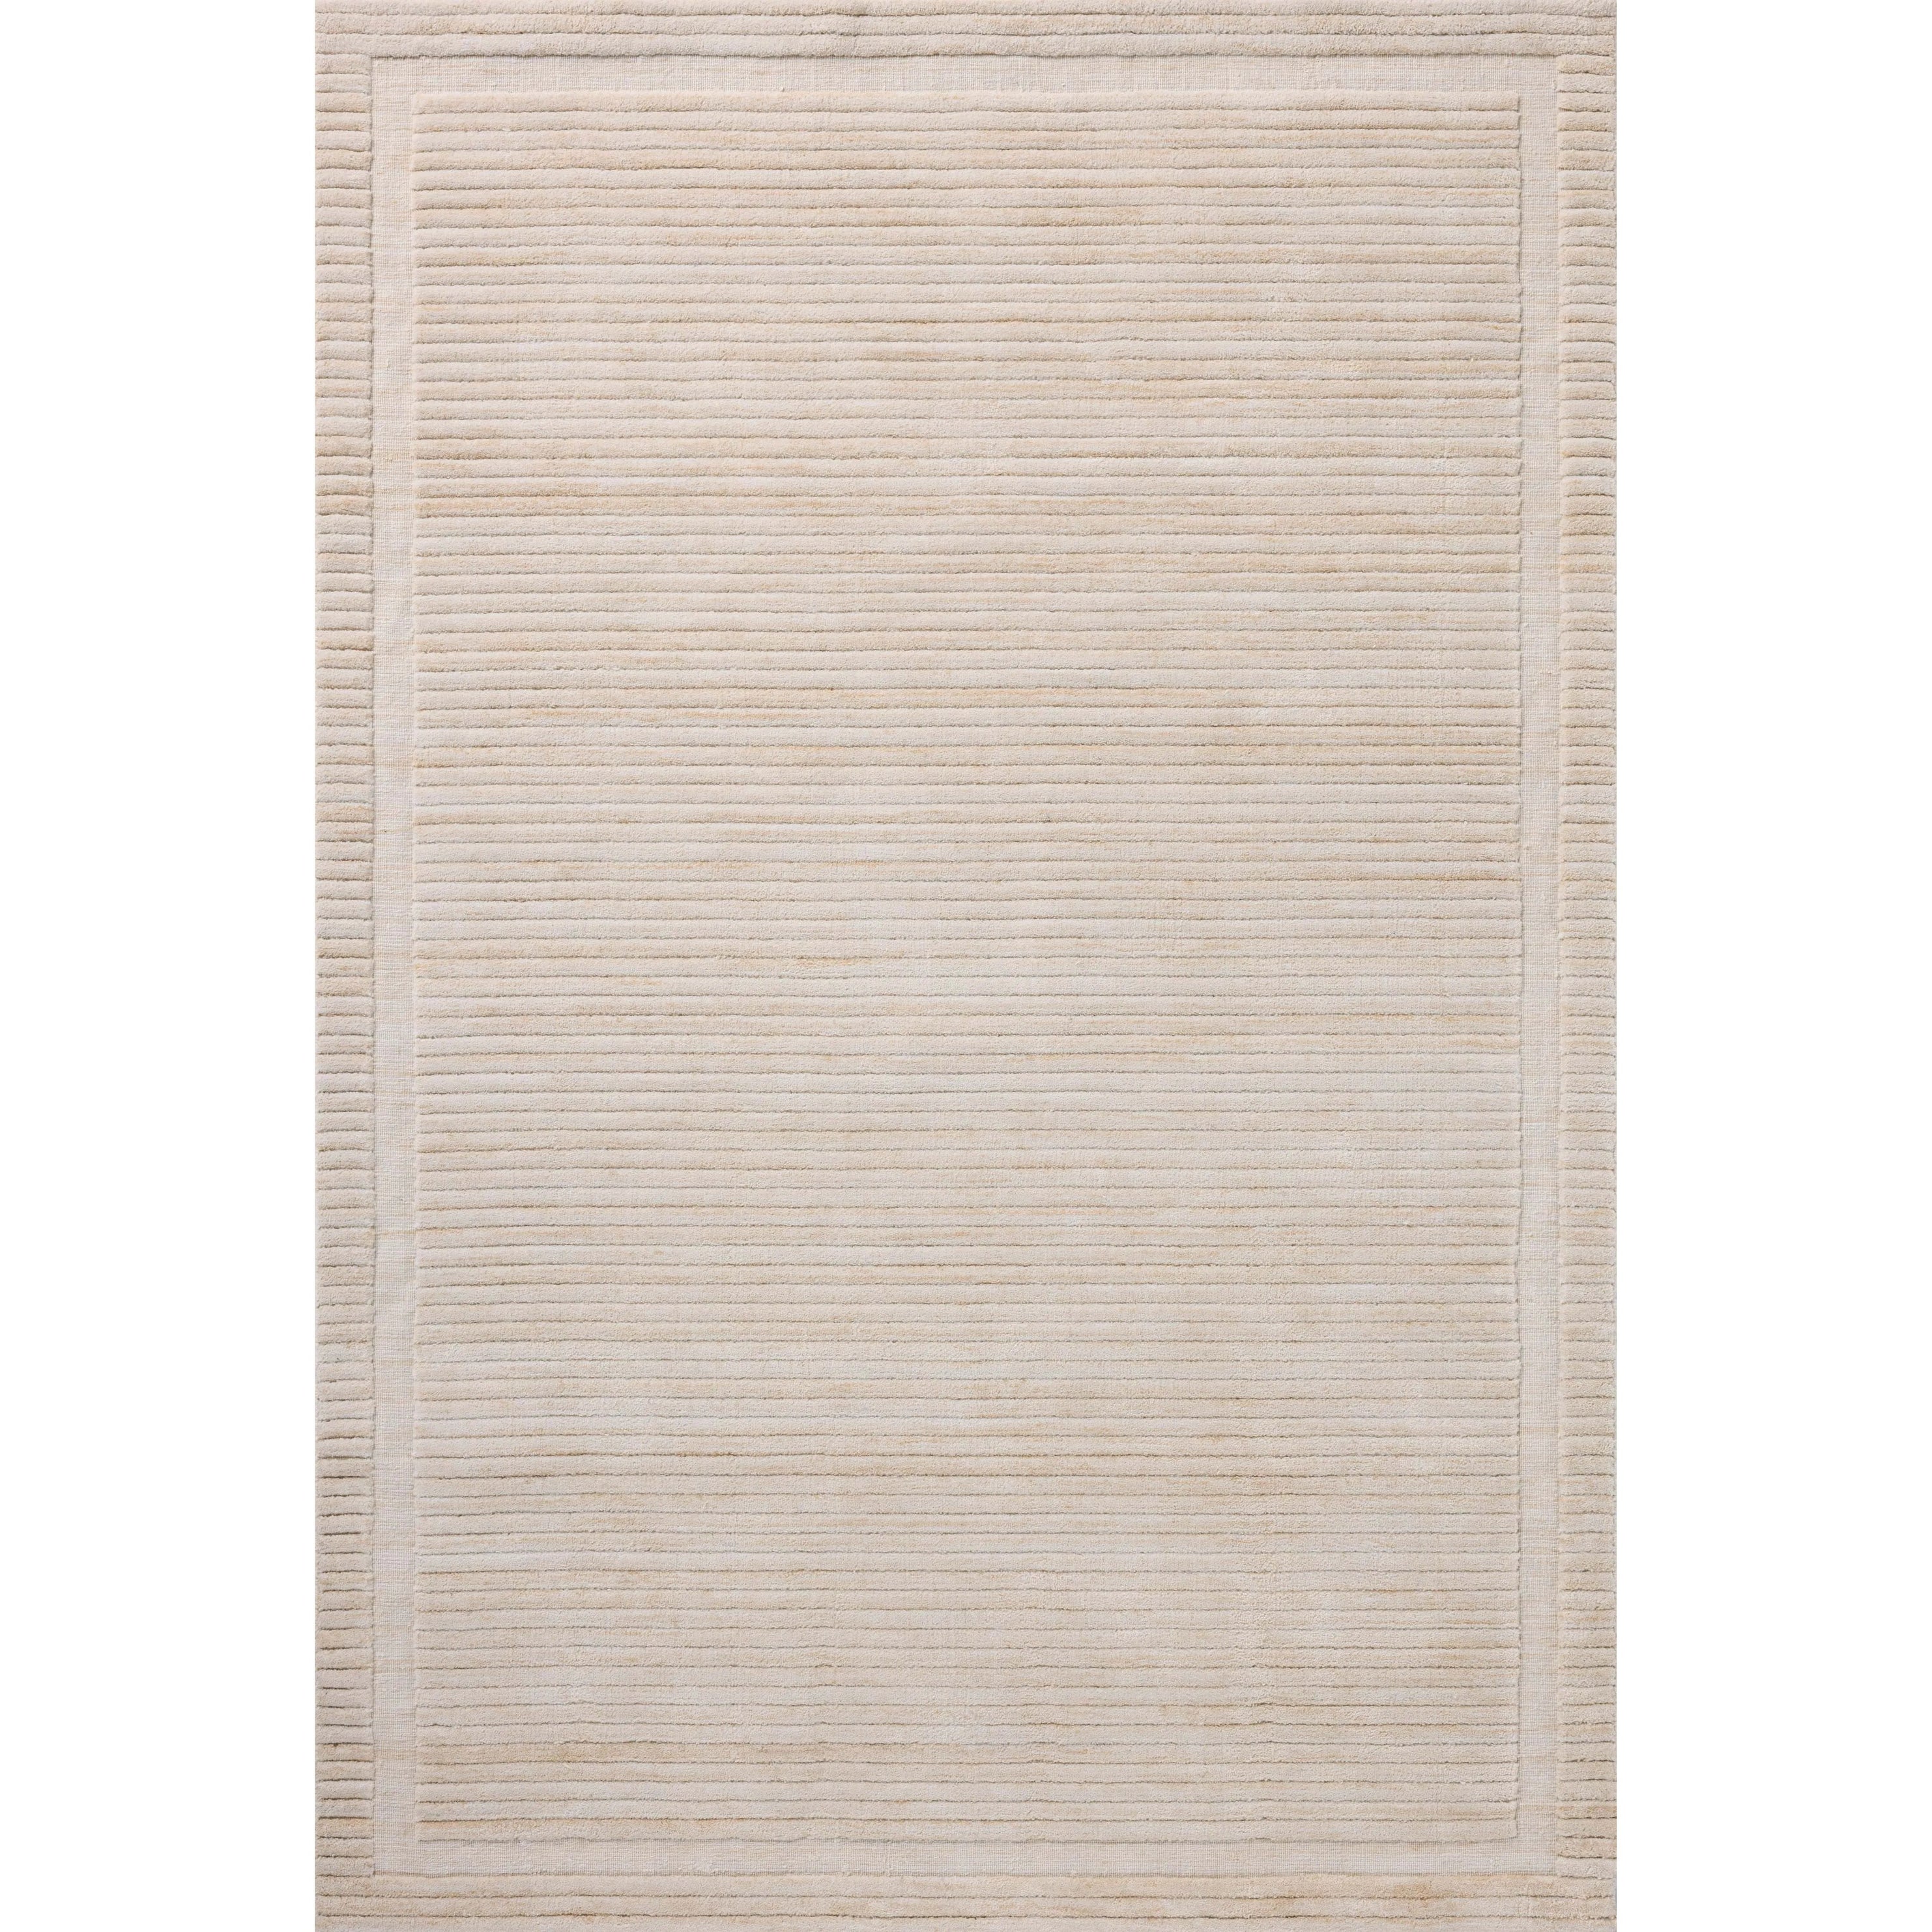 Irresistible to walk upon, the Dana Natural Rug by Brigette Romanek x Loloi has a high-low texture that alternates between a subtly shaggy pile and a soft base. Horizontal broken stripes give the area rug a fresh and energized structure, while a finish of fringe along the edges accentuates its sense of movement. Amethyst Home provides interior design, new home construction design consulting, vintage area rugs, and lighting in the Portland metro area.